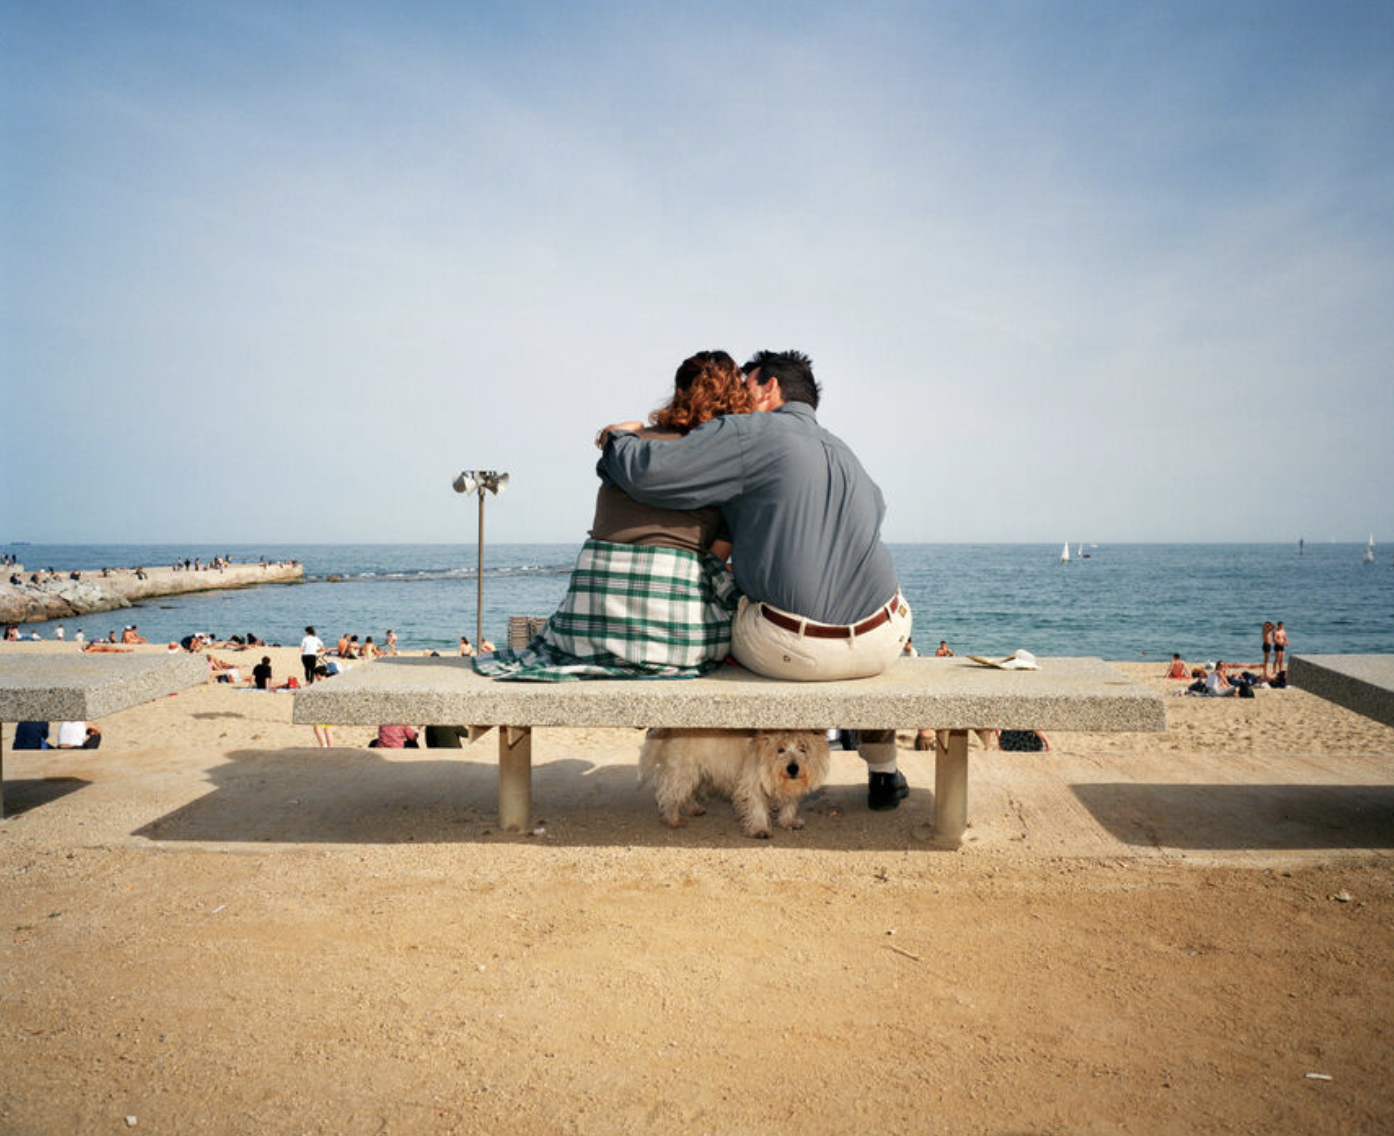 A couple is seen embracing on a bench near the beach as a small dog sits under the bench